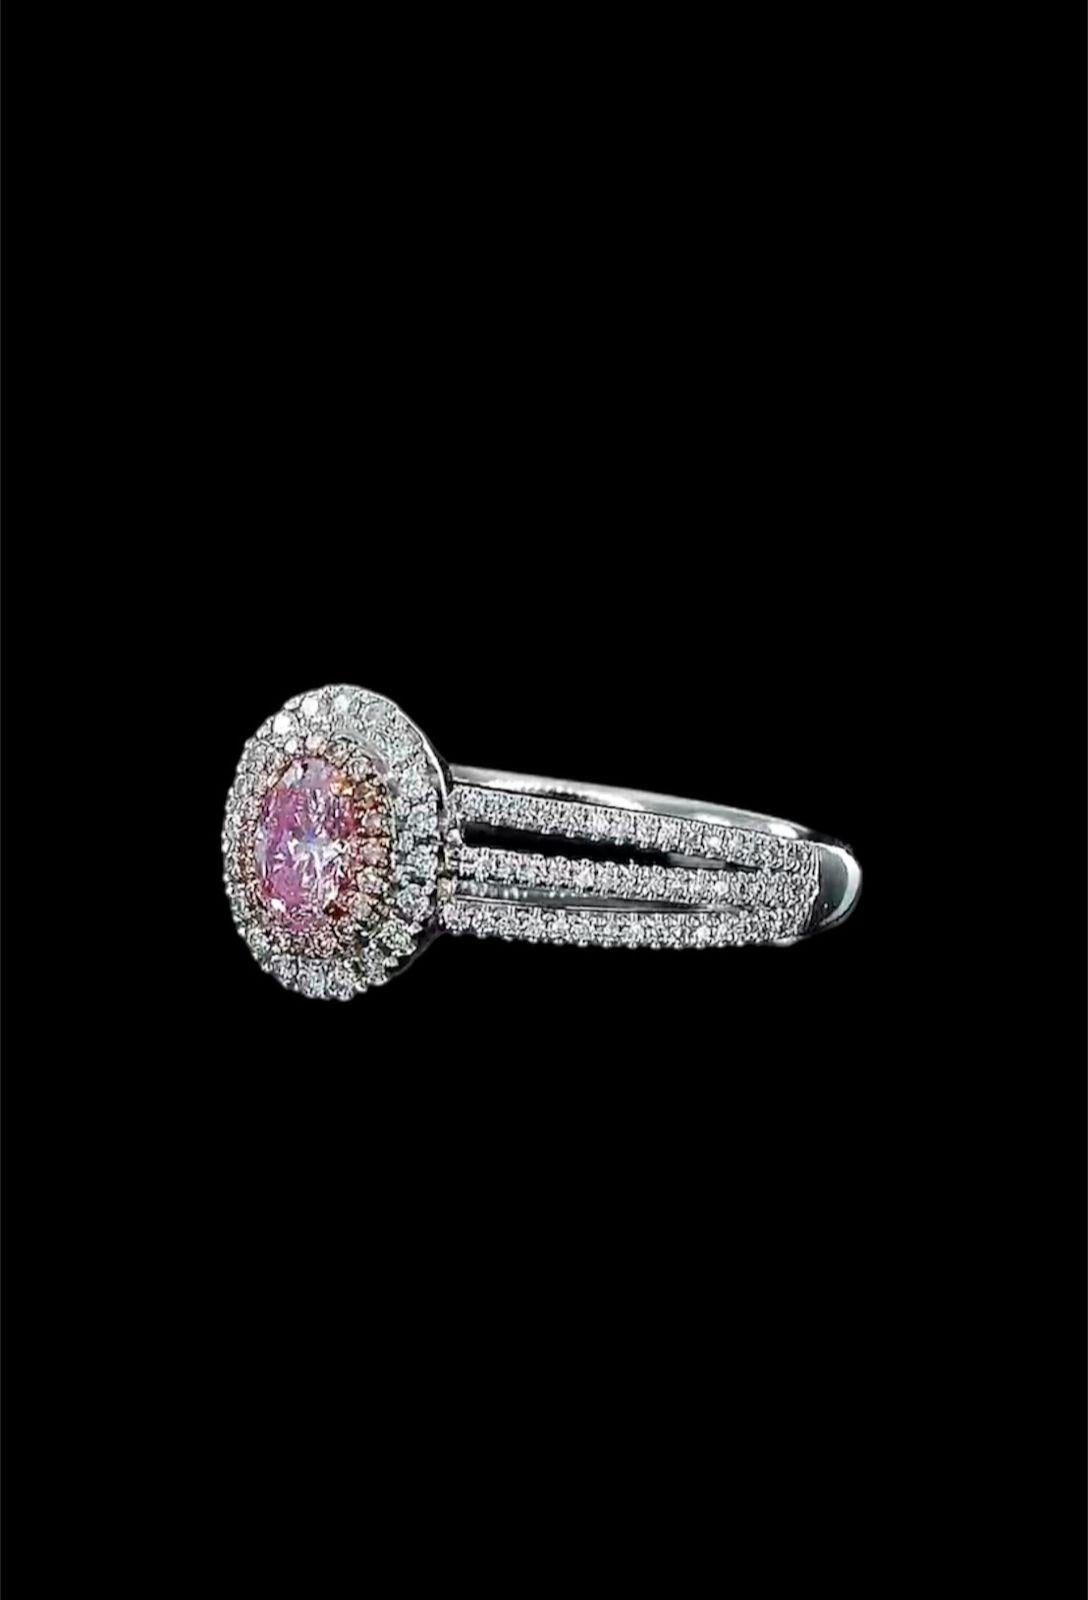 GIA Certified 0.33 Carat Faint Pink Diamond Ring VS2 Clarity For Sale 5